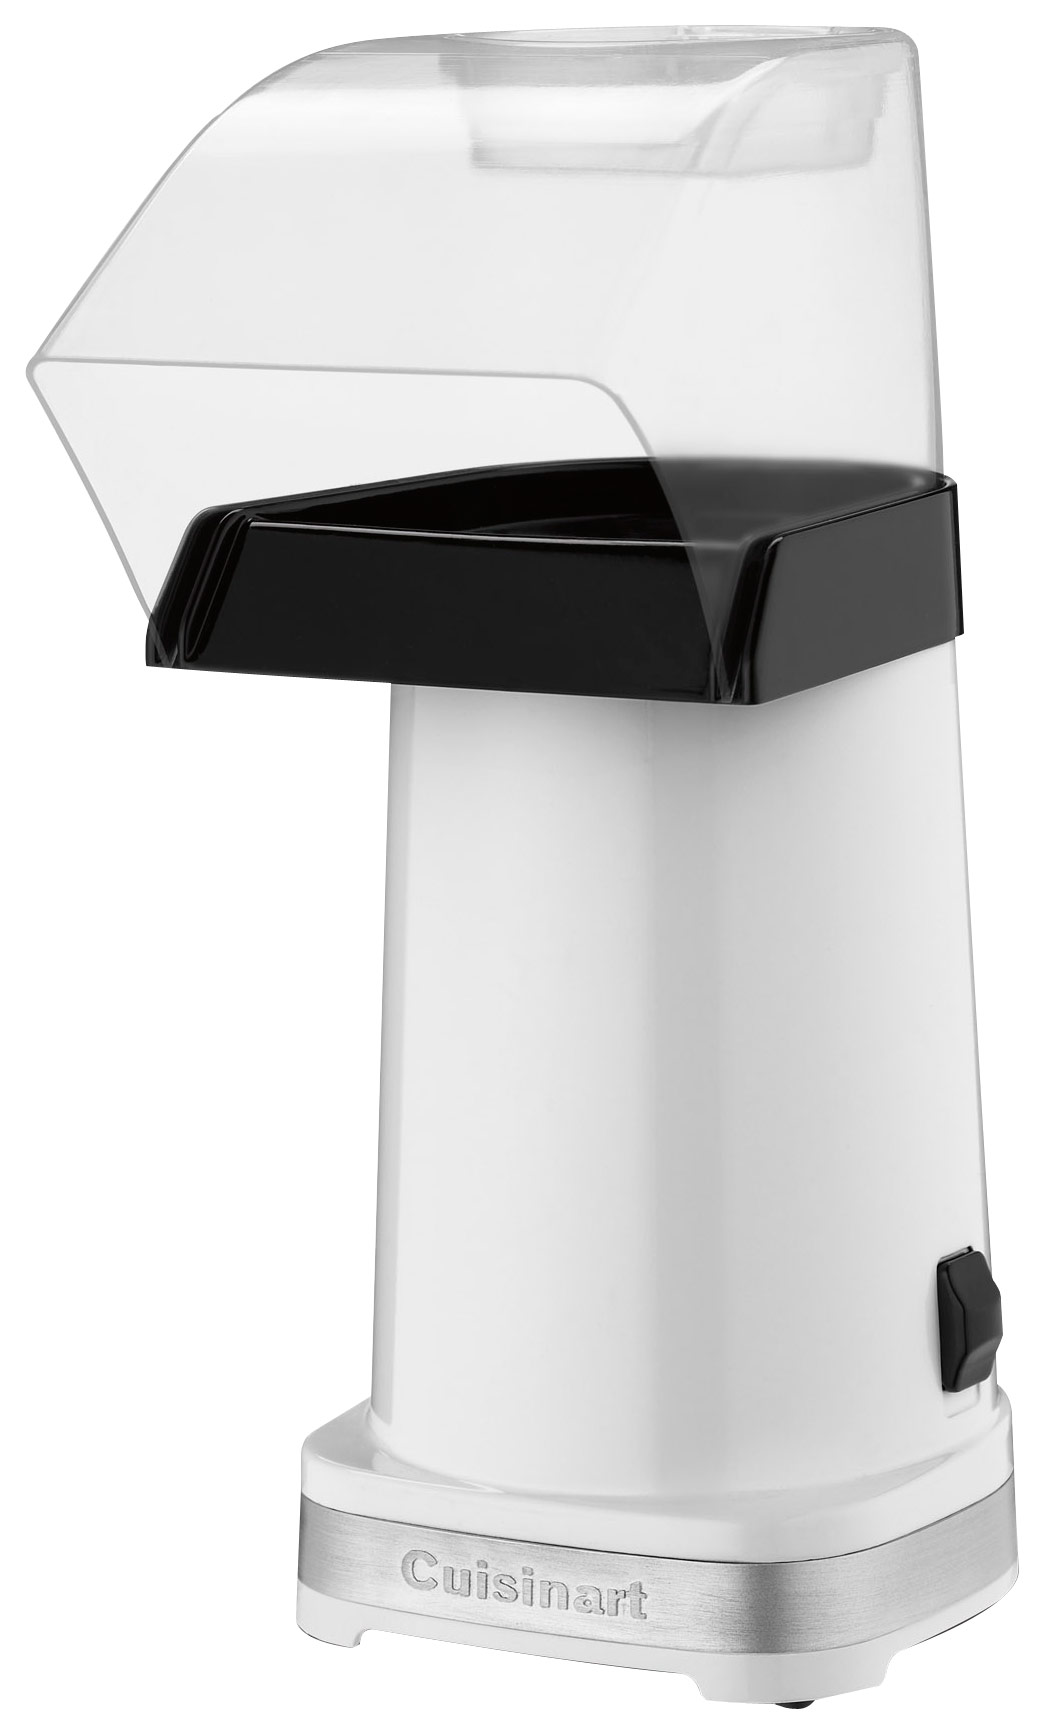 Angle View: Cuisinart - 15-Cup EasyPop Hot Air Popcorn Maker - White